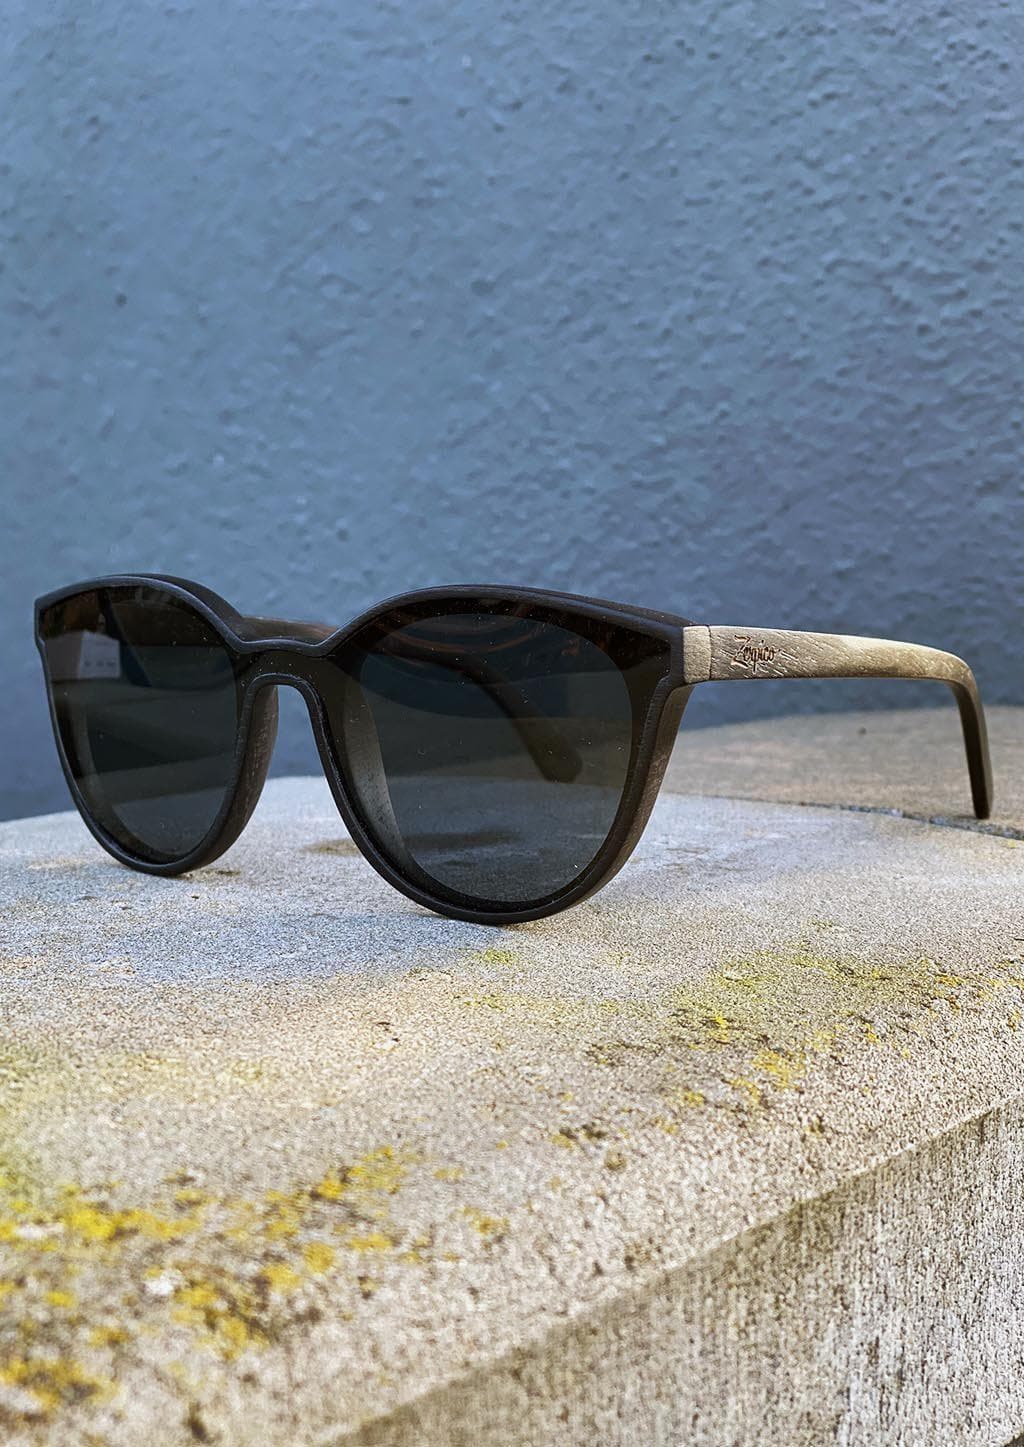 Eyewood - Madison - All wooden sunglasses with style. Outside in the sun.